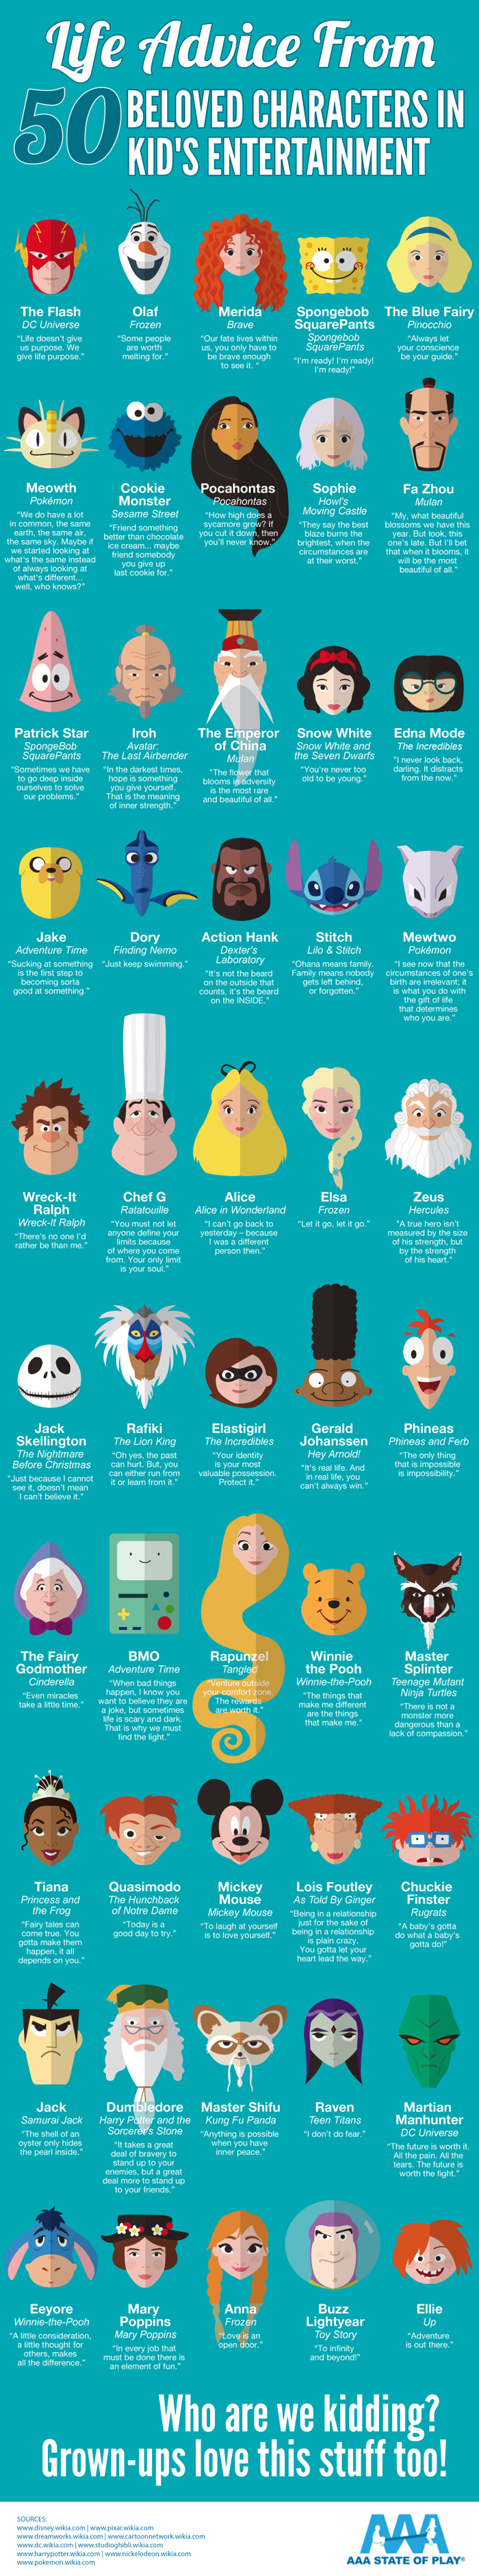 Life Advice from 50 Beloved Characters in Kid's Entertainment